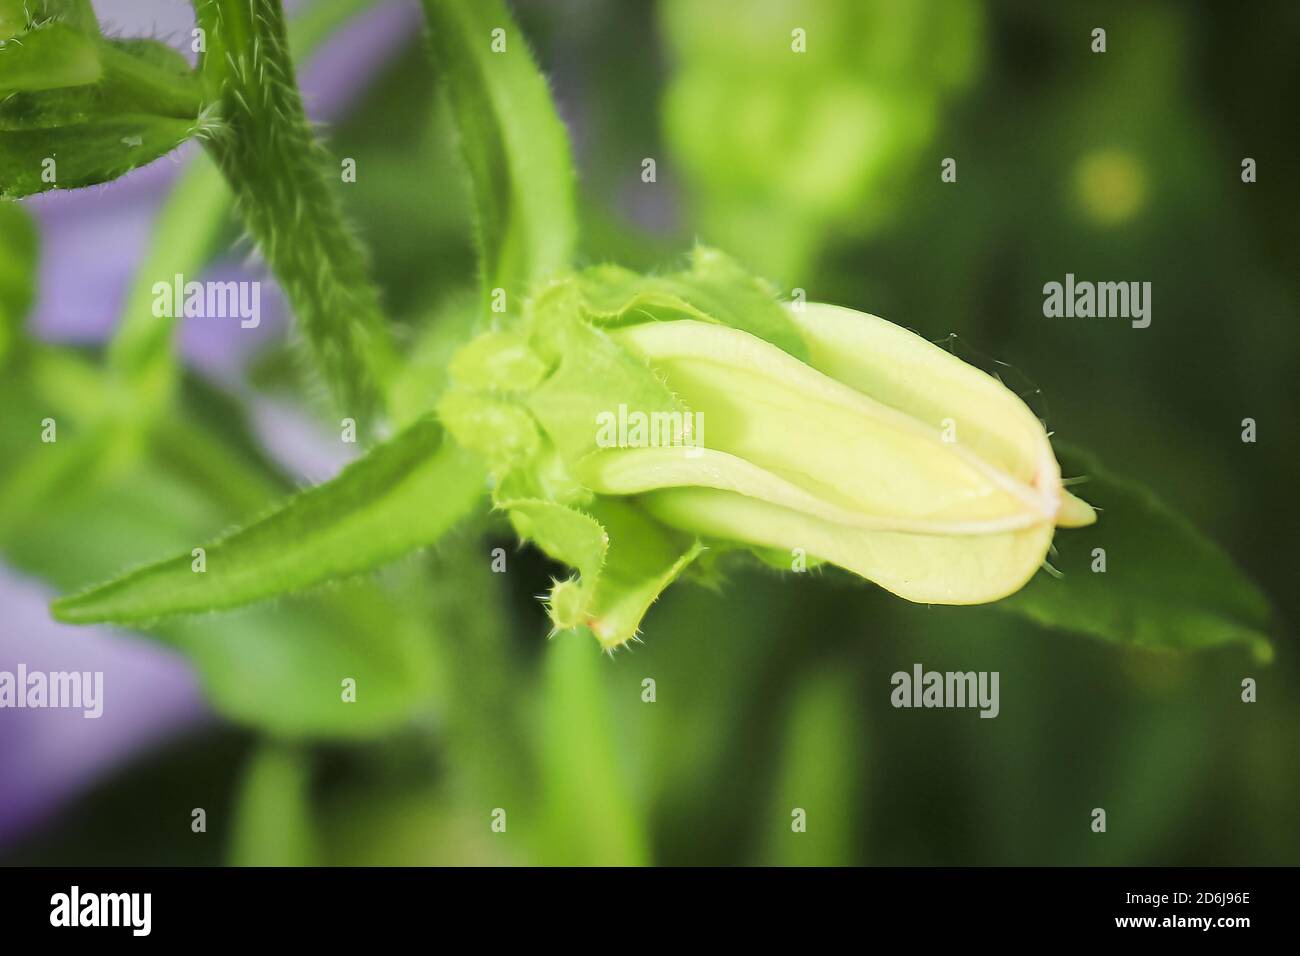 Macro view of a closed bellflower blossom Stock Photo